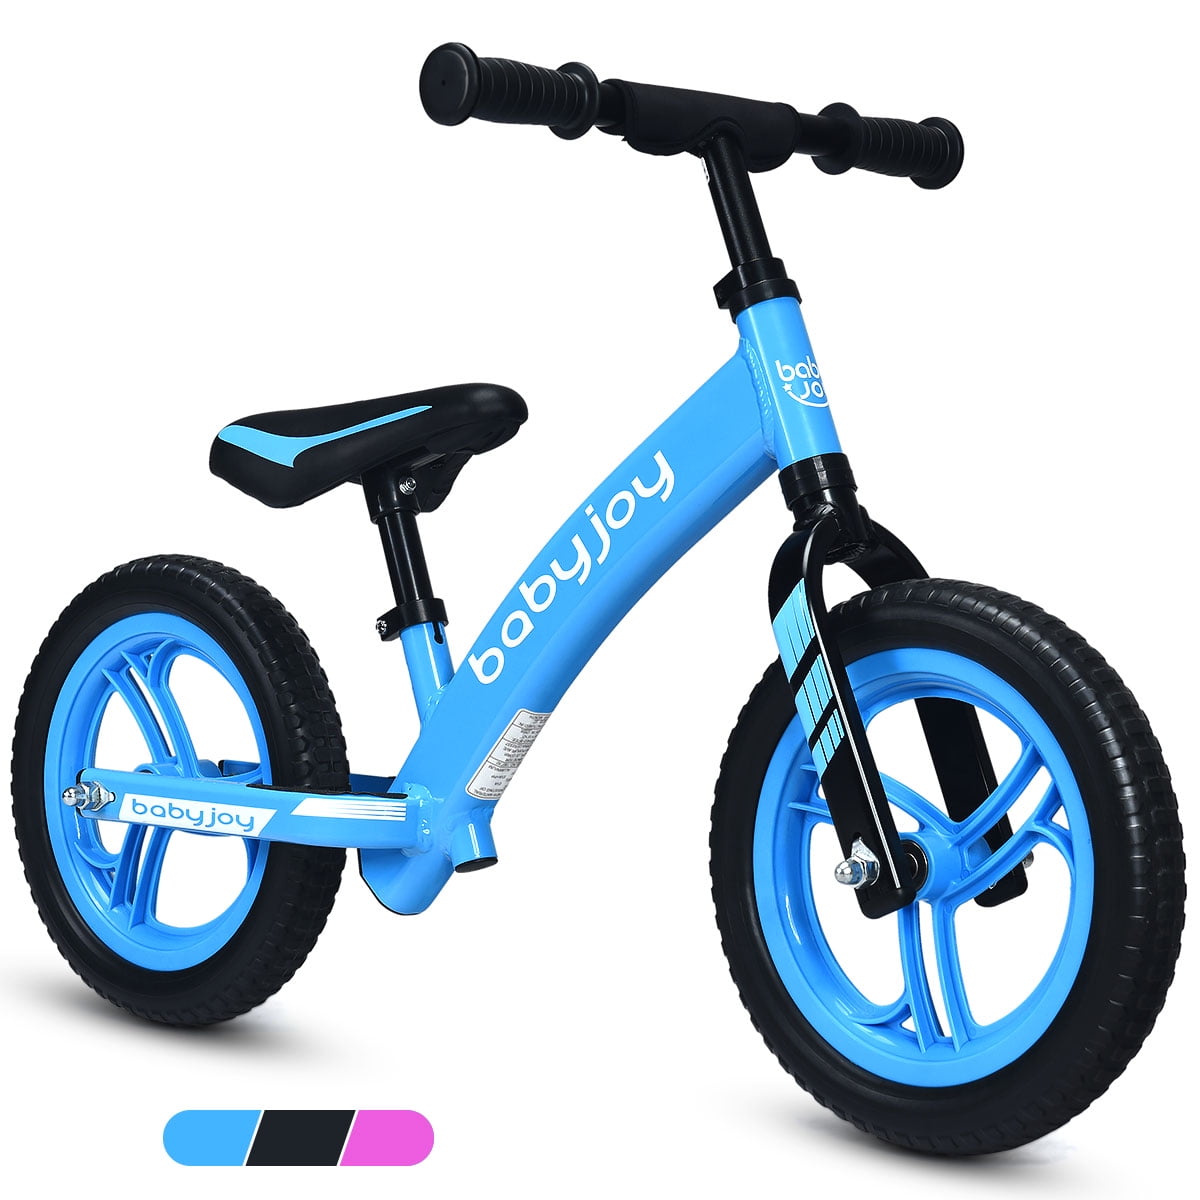 Kid Balance Bike With Brake No-Pedal Learn To Ride Pre Adjustable Seat Toys Gift 